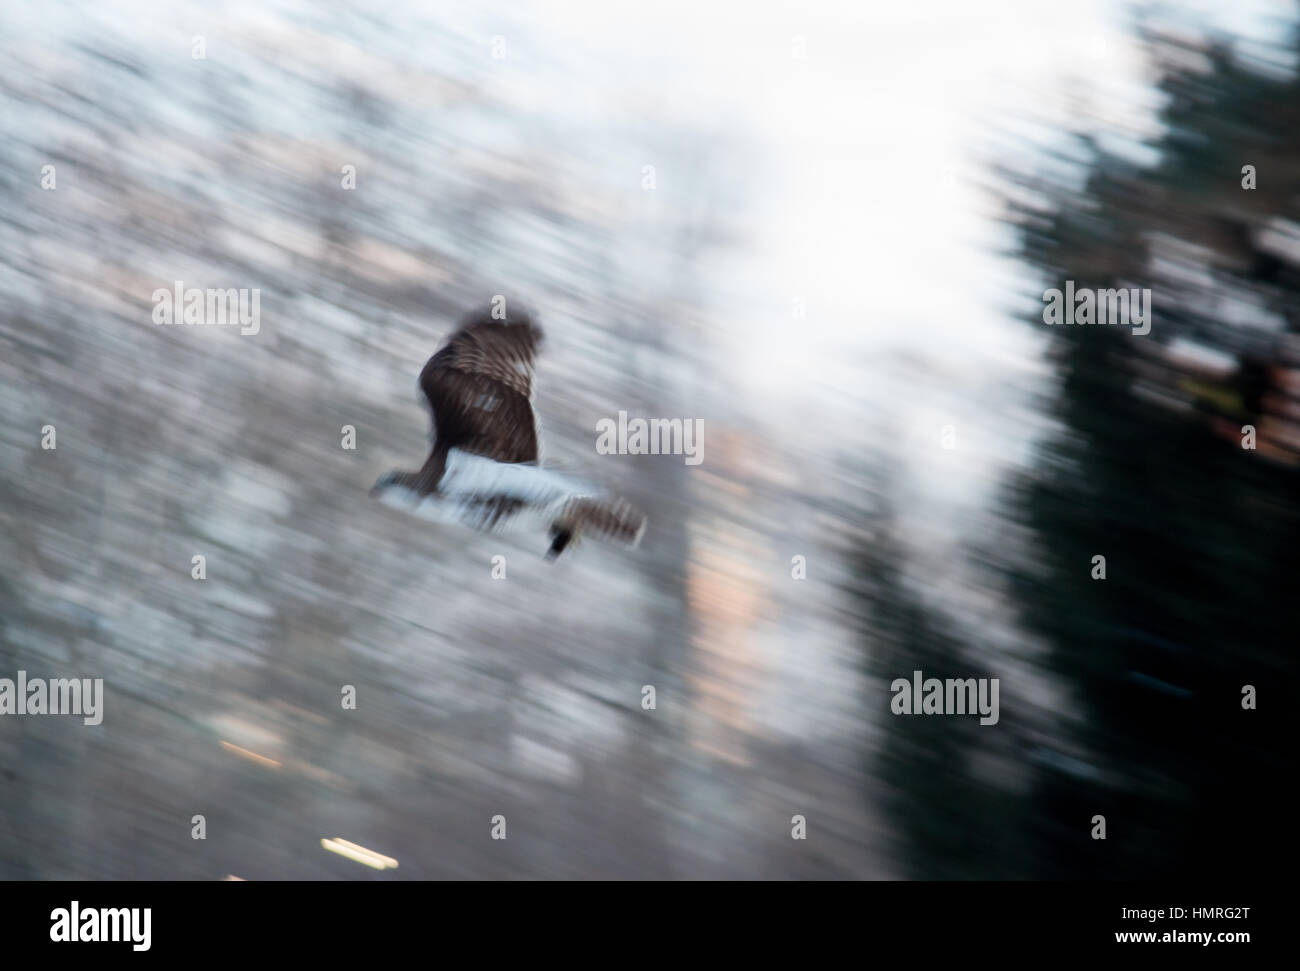 Flying hawk out of focus Stock Photo